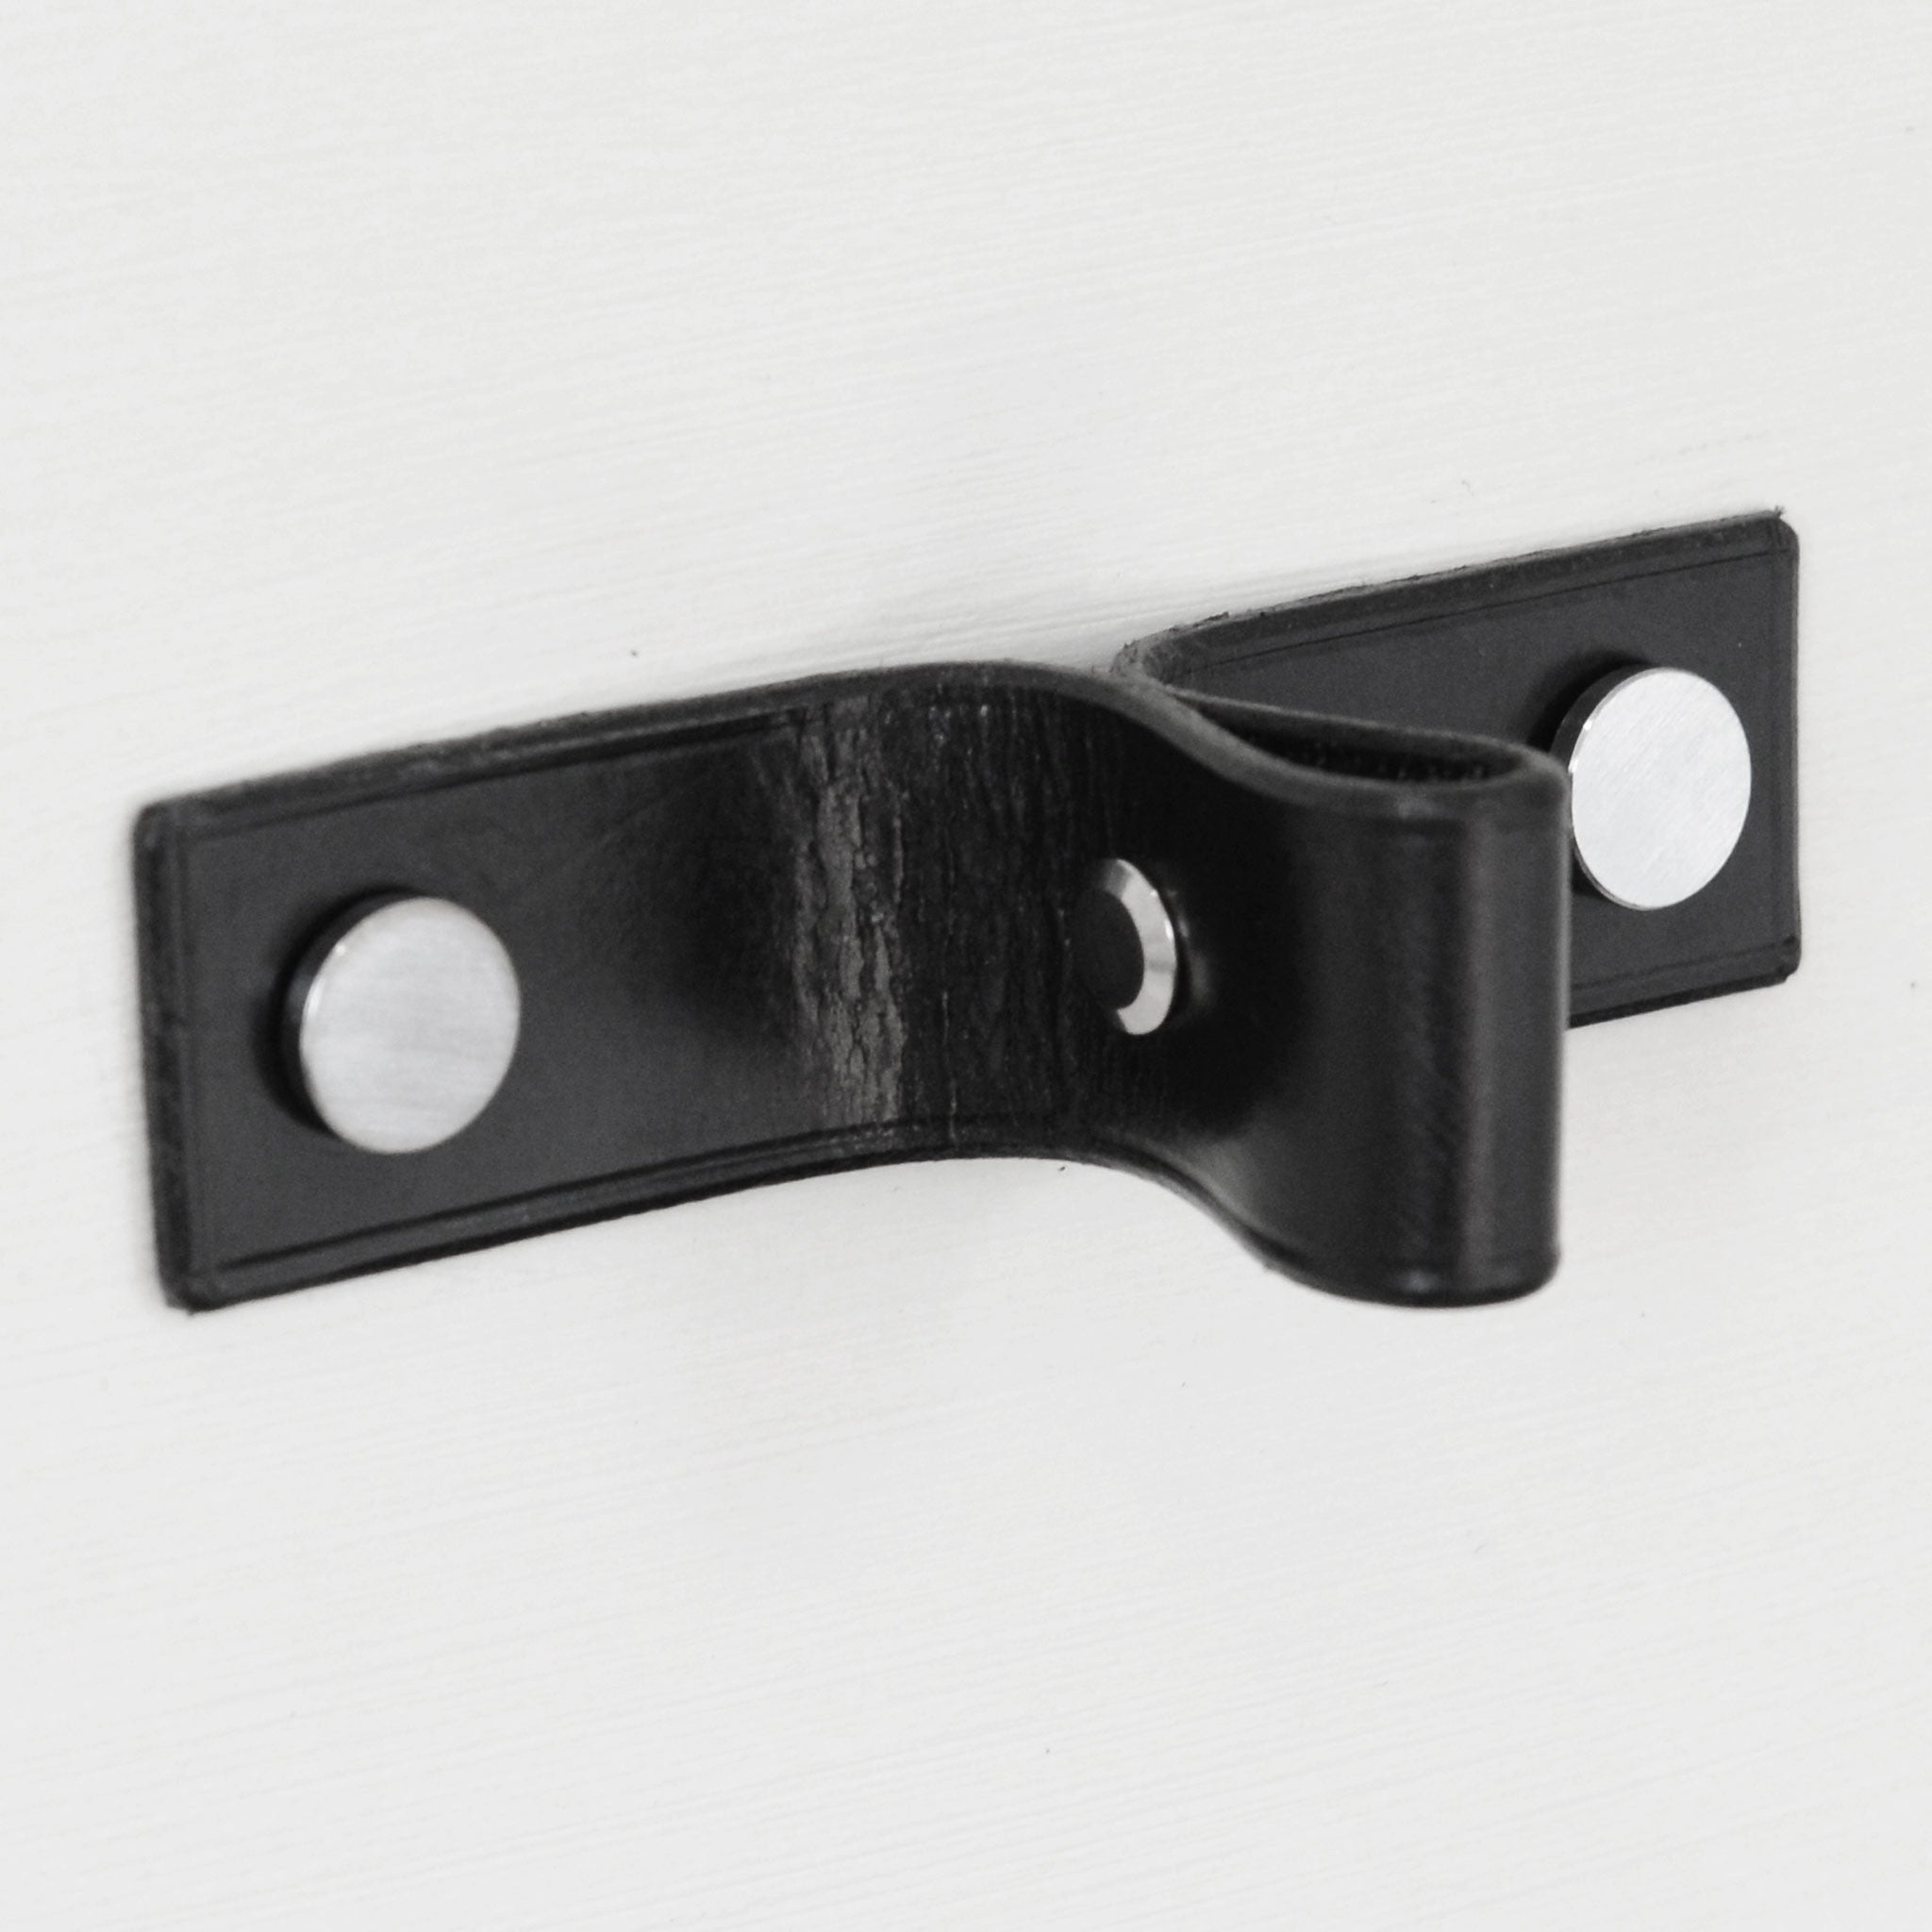 Siboney Pinched Black Leather Door Pull with Satin Chrome fixings